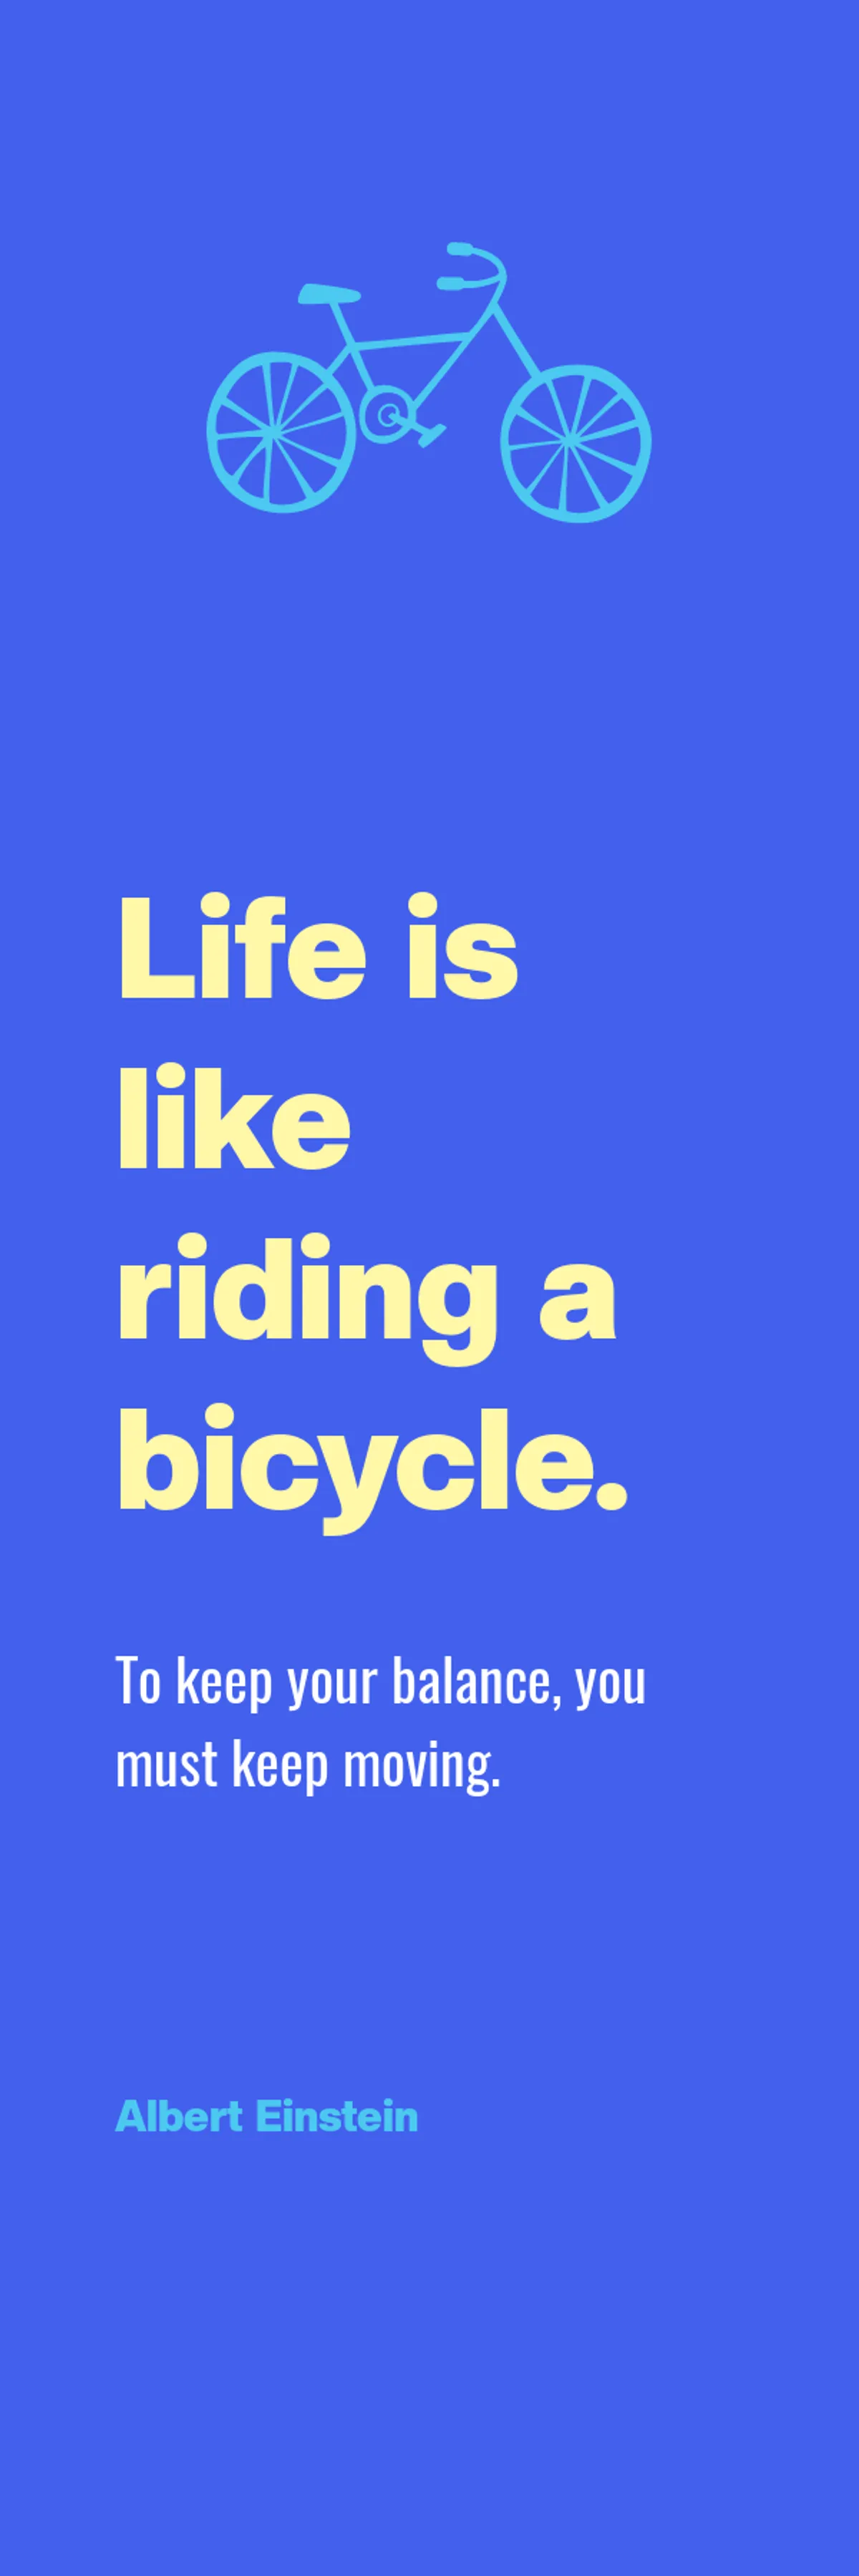 Life is like riding a bicycle.  To keep you balanced, you must keep going. - Albert Einstein  template